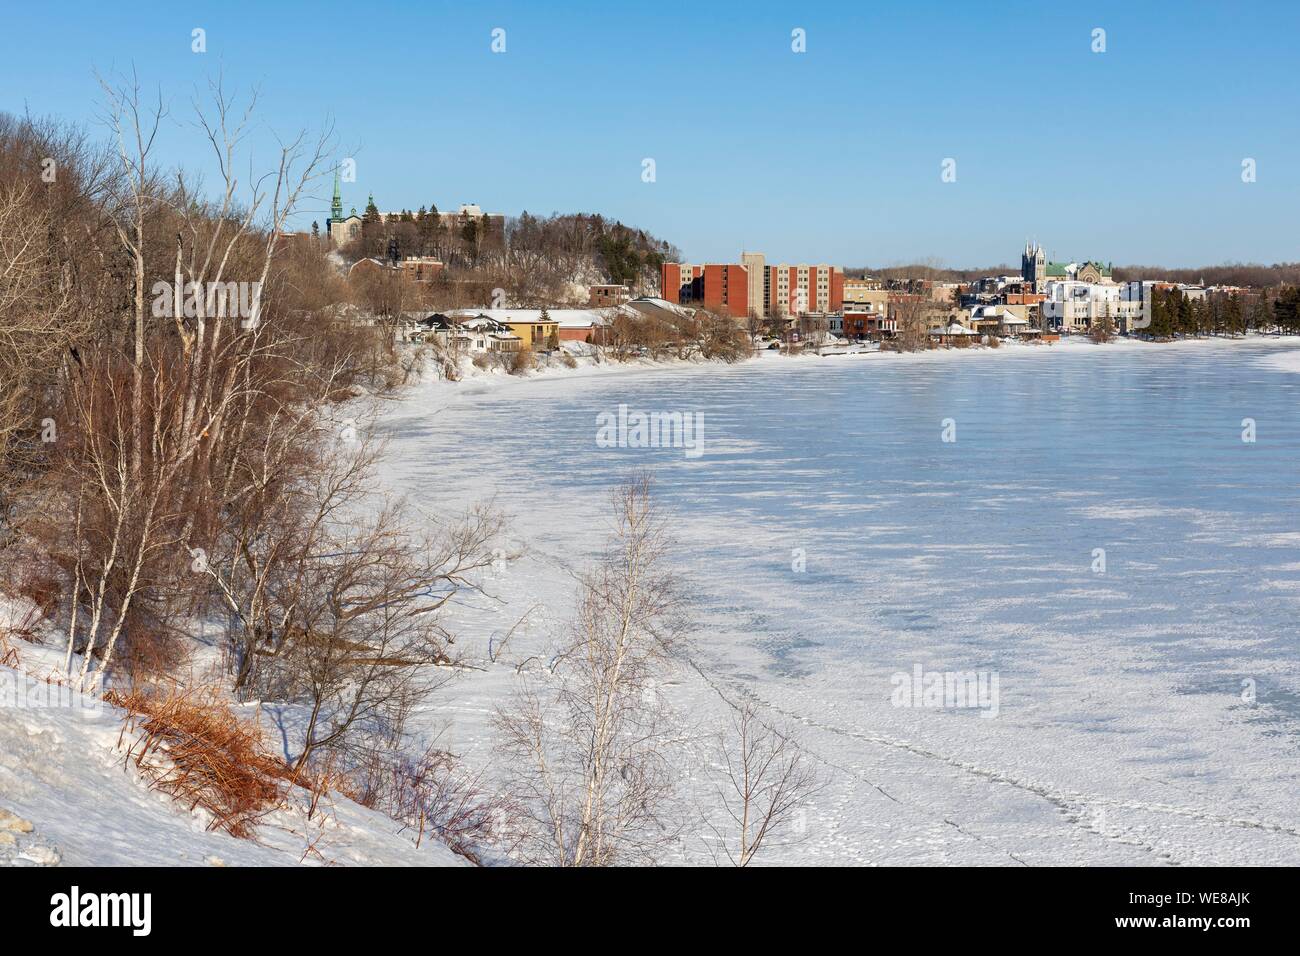 Canada, Quebec province, Mauricie region, Shawinigan and surrounding area, general view of the city on the banks of the frozen St. Maurice River Stock Photo